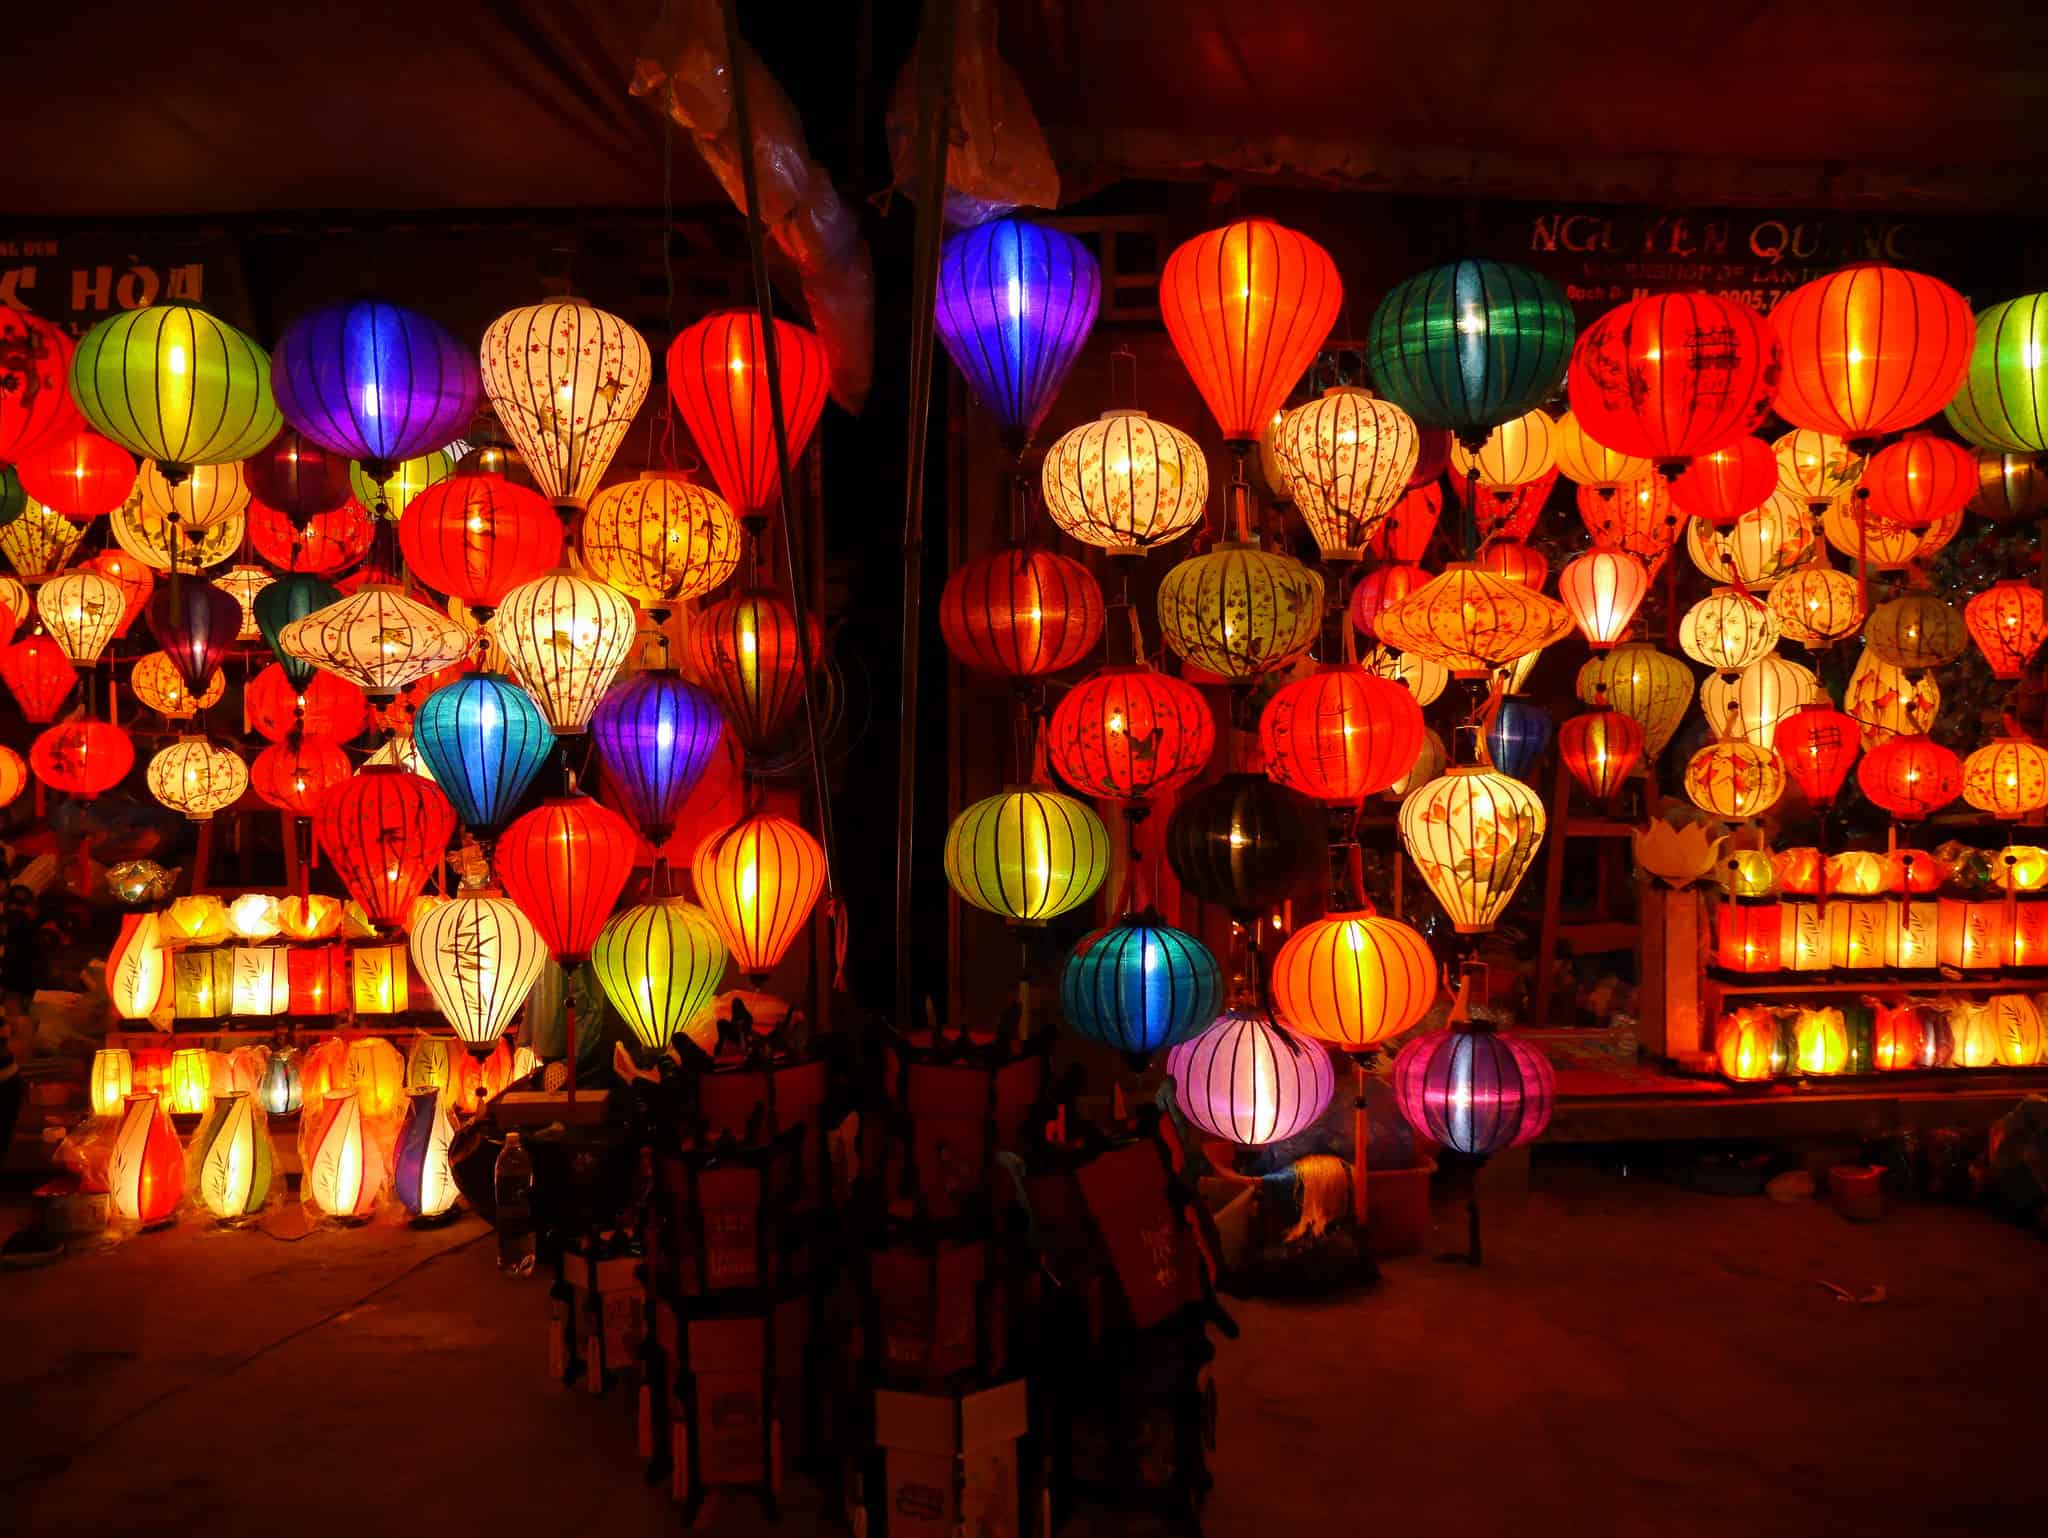 Hoi An Night Market Travel Guide - What To Buy